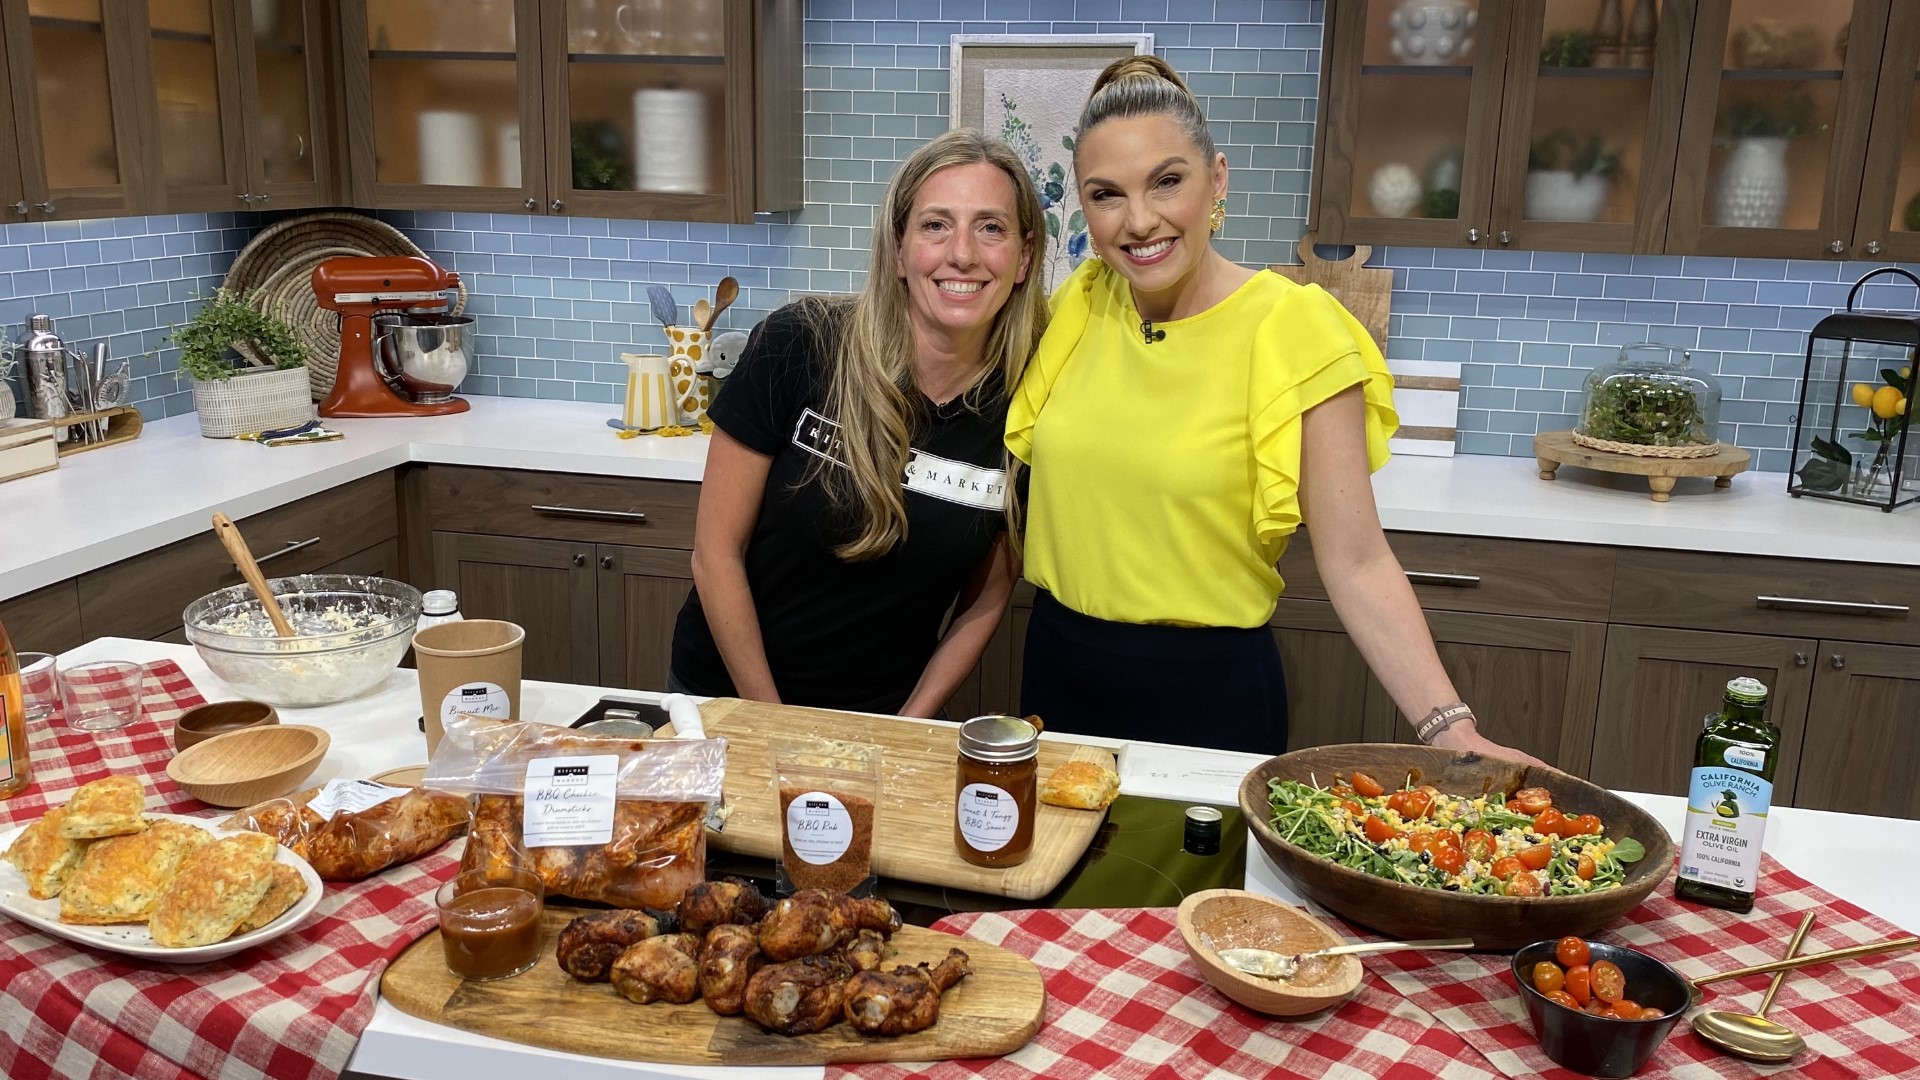 Stephanie King from Kitchen & Market shares a recipe for barbeque chicken and biscuits.